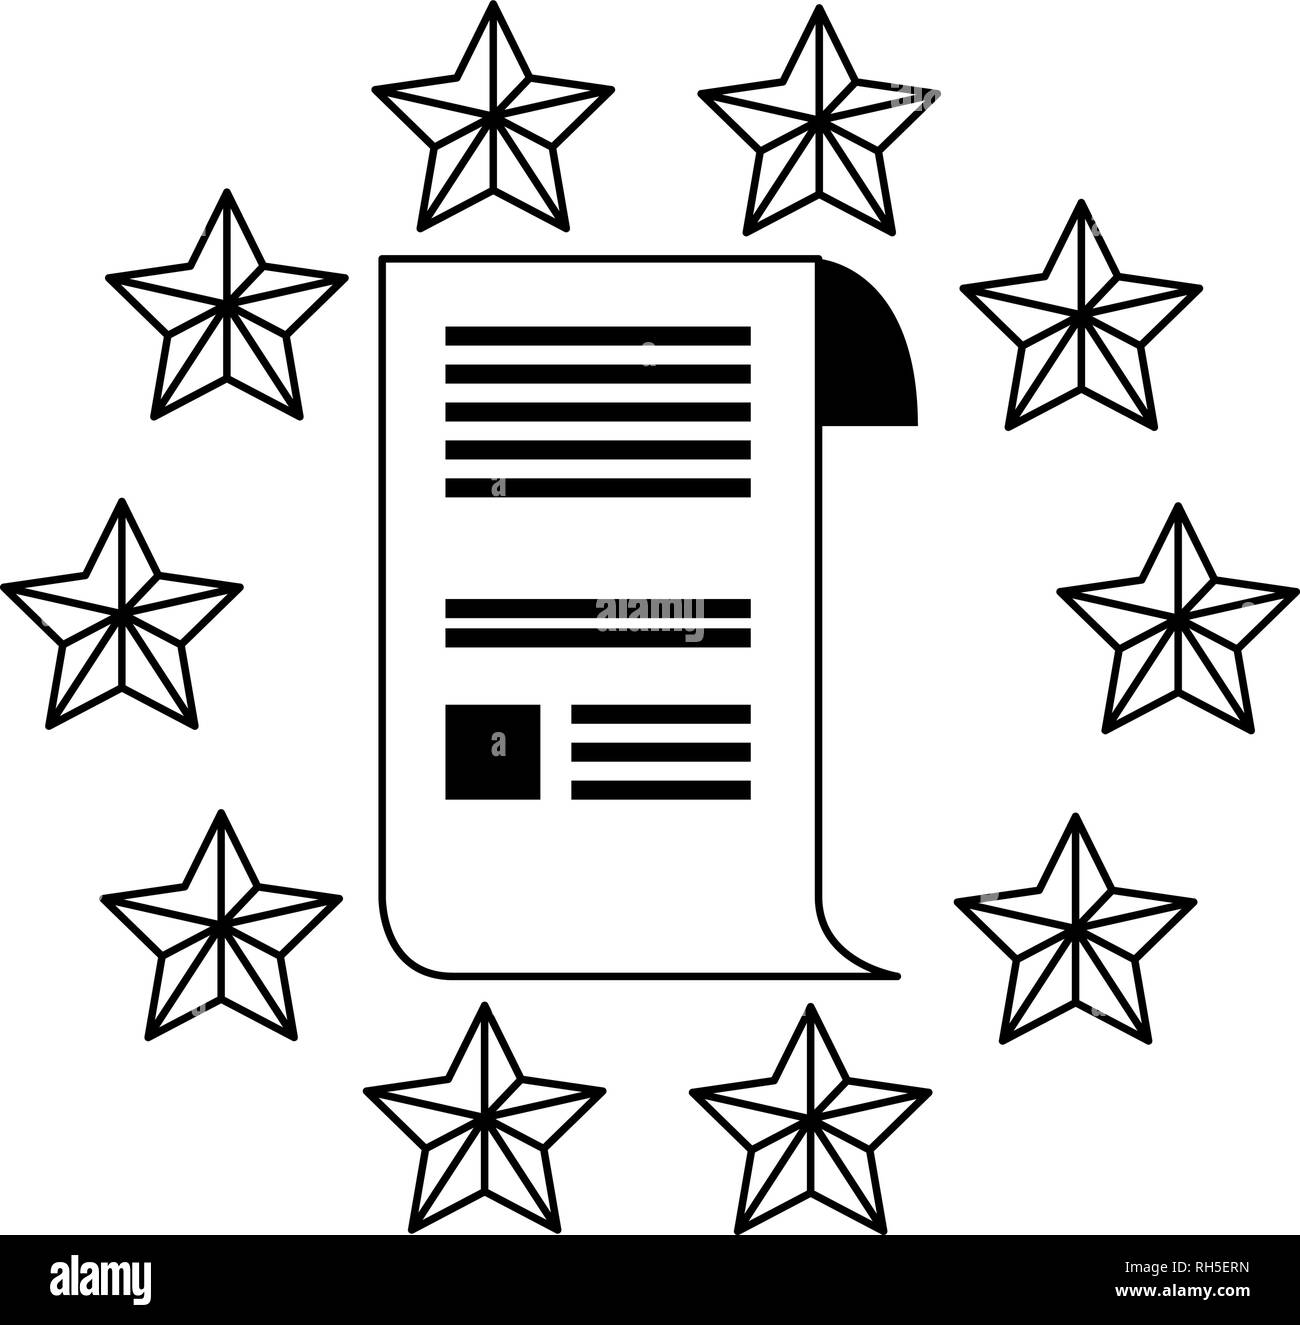 patent contract security stars copyright emblem vector illustration Stock Vector